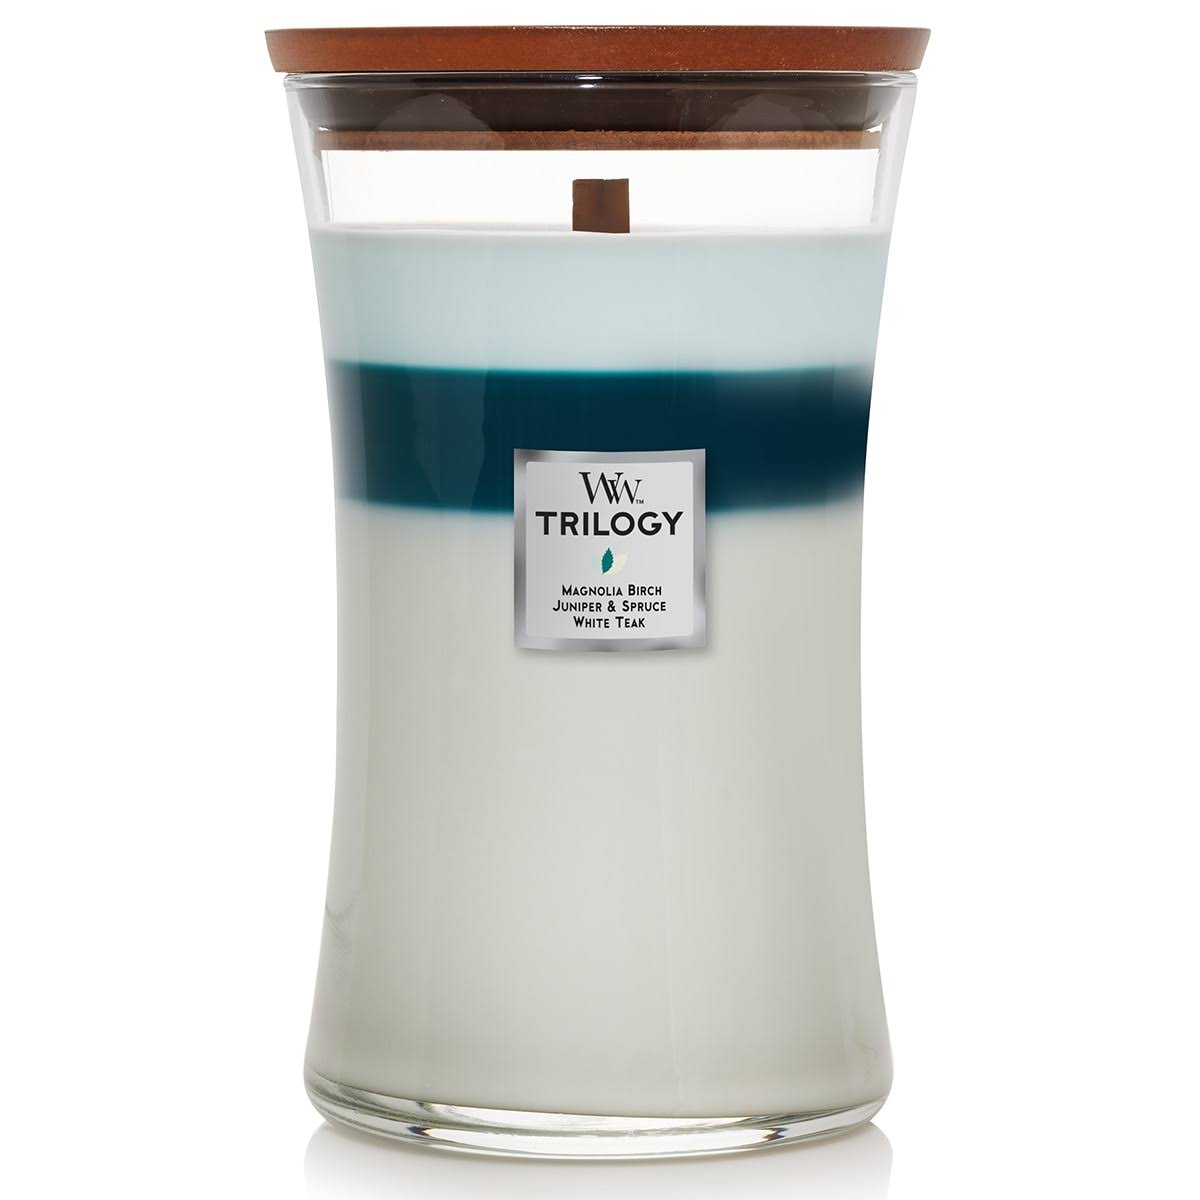 Ww Trilogy Candle, Icy Woodland - 1 candle, 21.5 oz